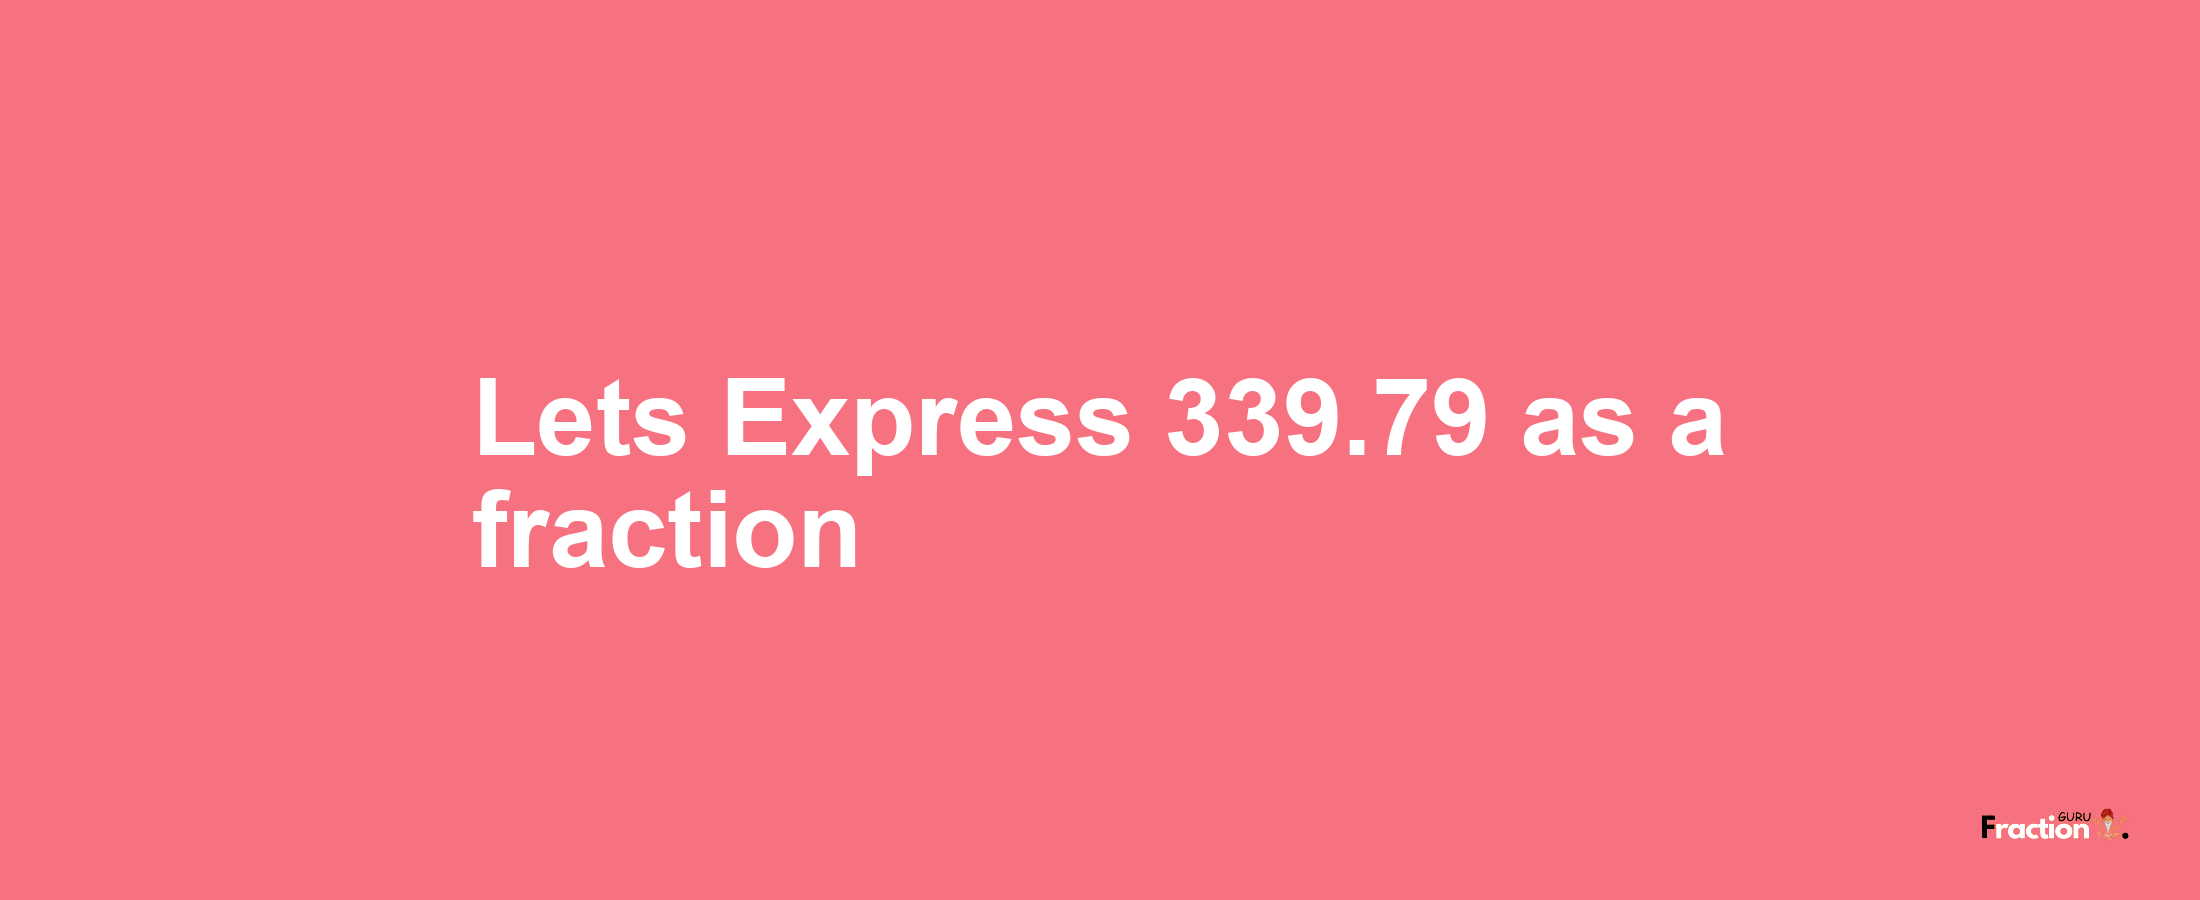 Lets Express 339.79 as afraction